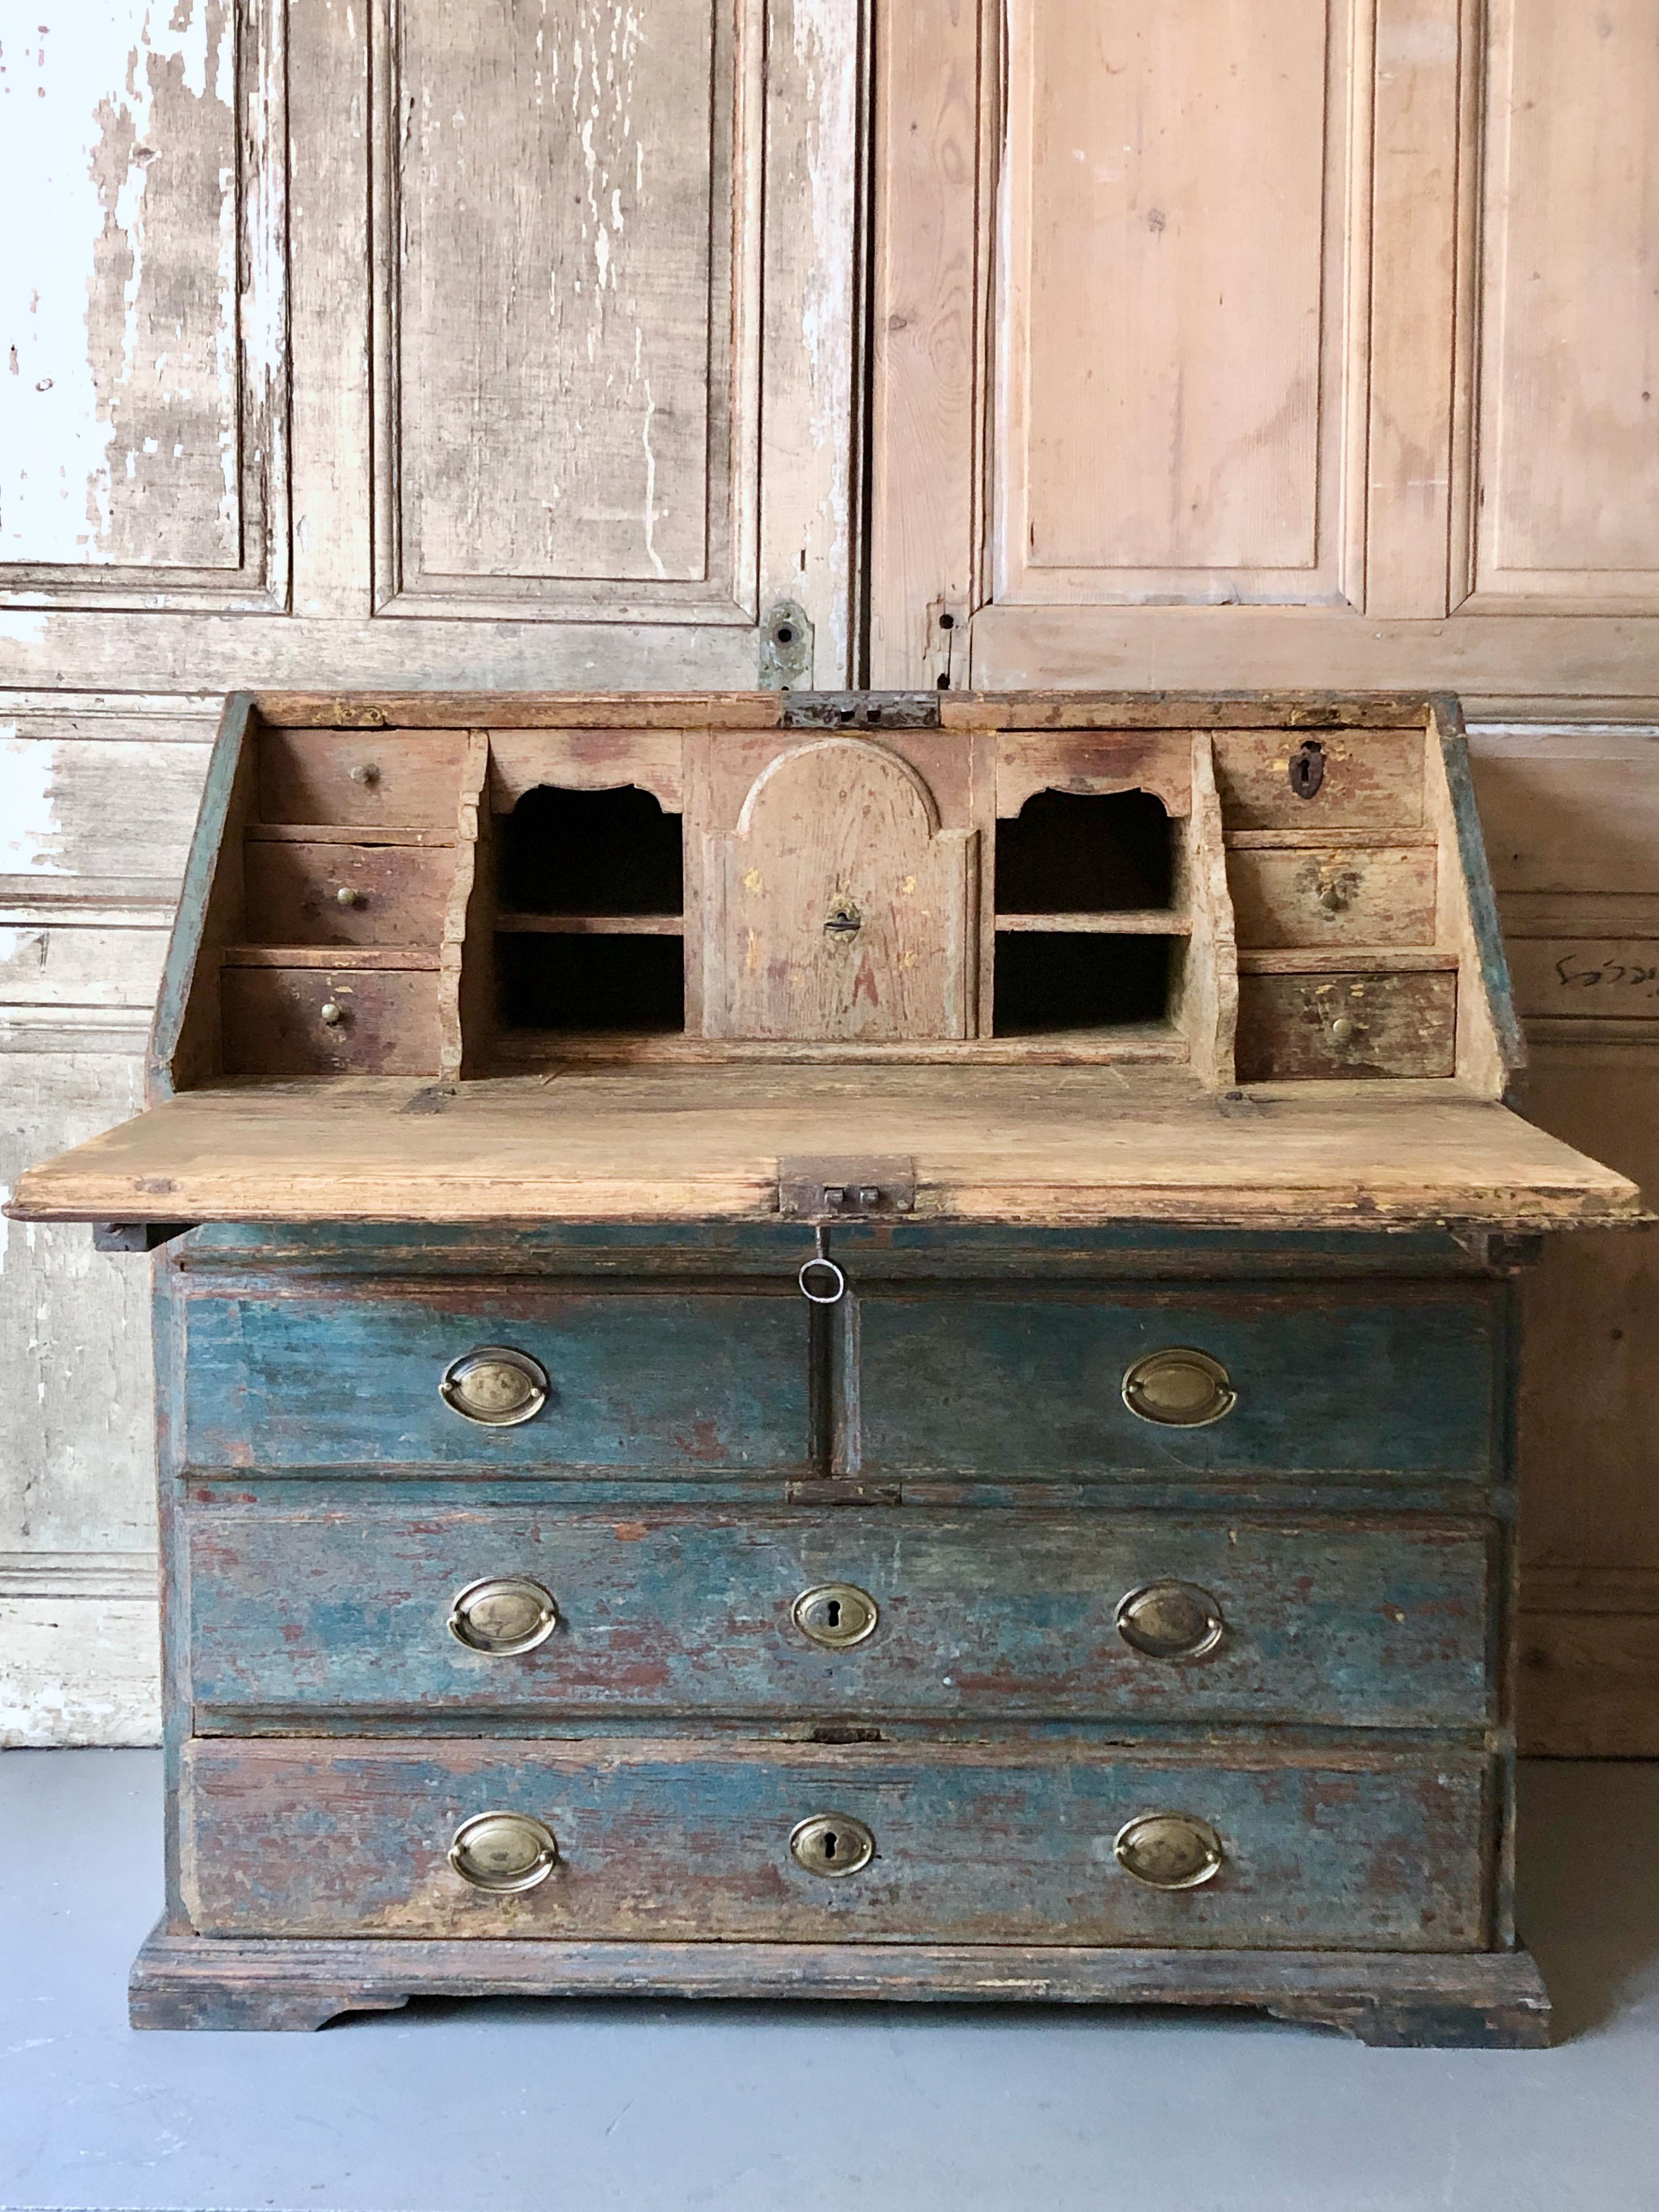 18th century Swedish late Baroque secretaire in original gorgeous blue/green patinated color with slant front desk with a fitted interior over the two long and two smaller drawer base. All in deep original blue/green paint..
When writing surface